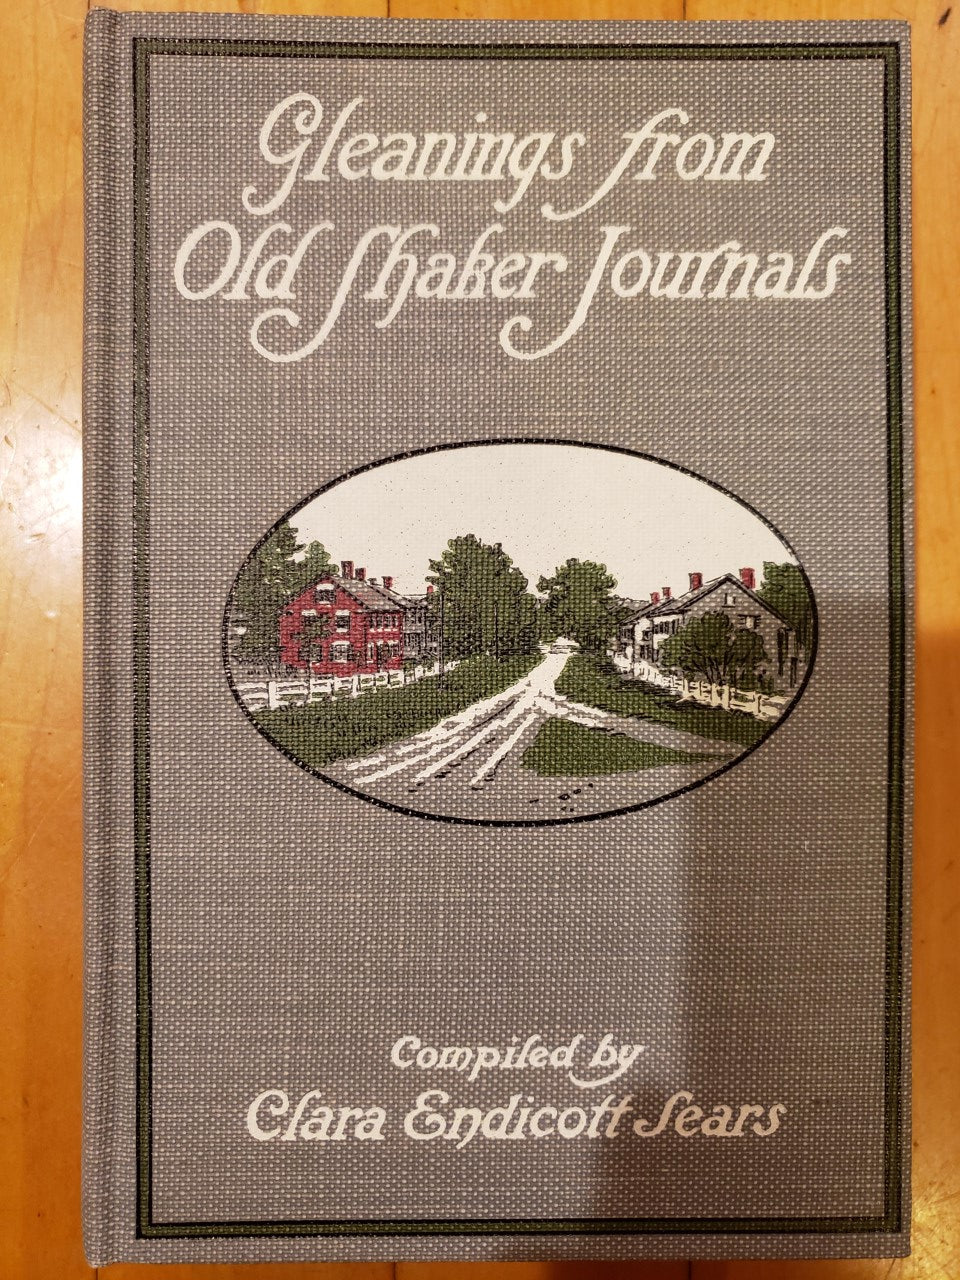 Gleanings from Old Shaker Journals by Clara Endicott Sears - Printed 1916 Rare Book